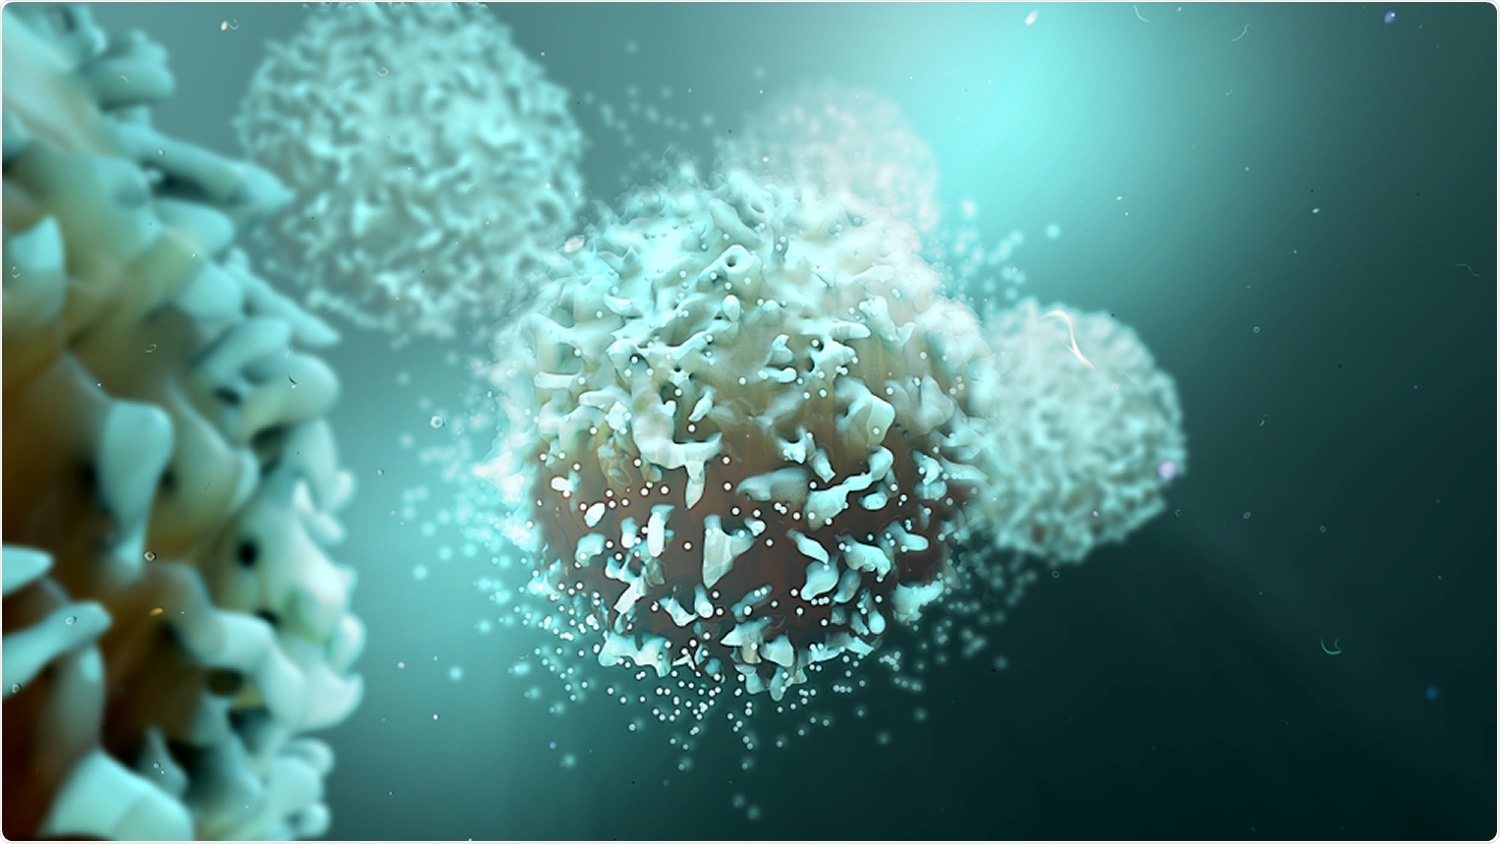 Study: Whole blood-based measurement of SARS-CoV-2-specific T cell responses reveals asymptomatic infection and vaccine efficacy in healthy subjects and patients with solid organ cancers. Image Credit: Design Cells / Shutterstock